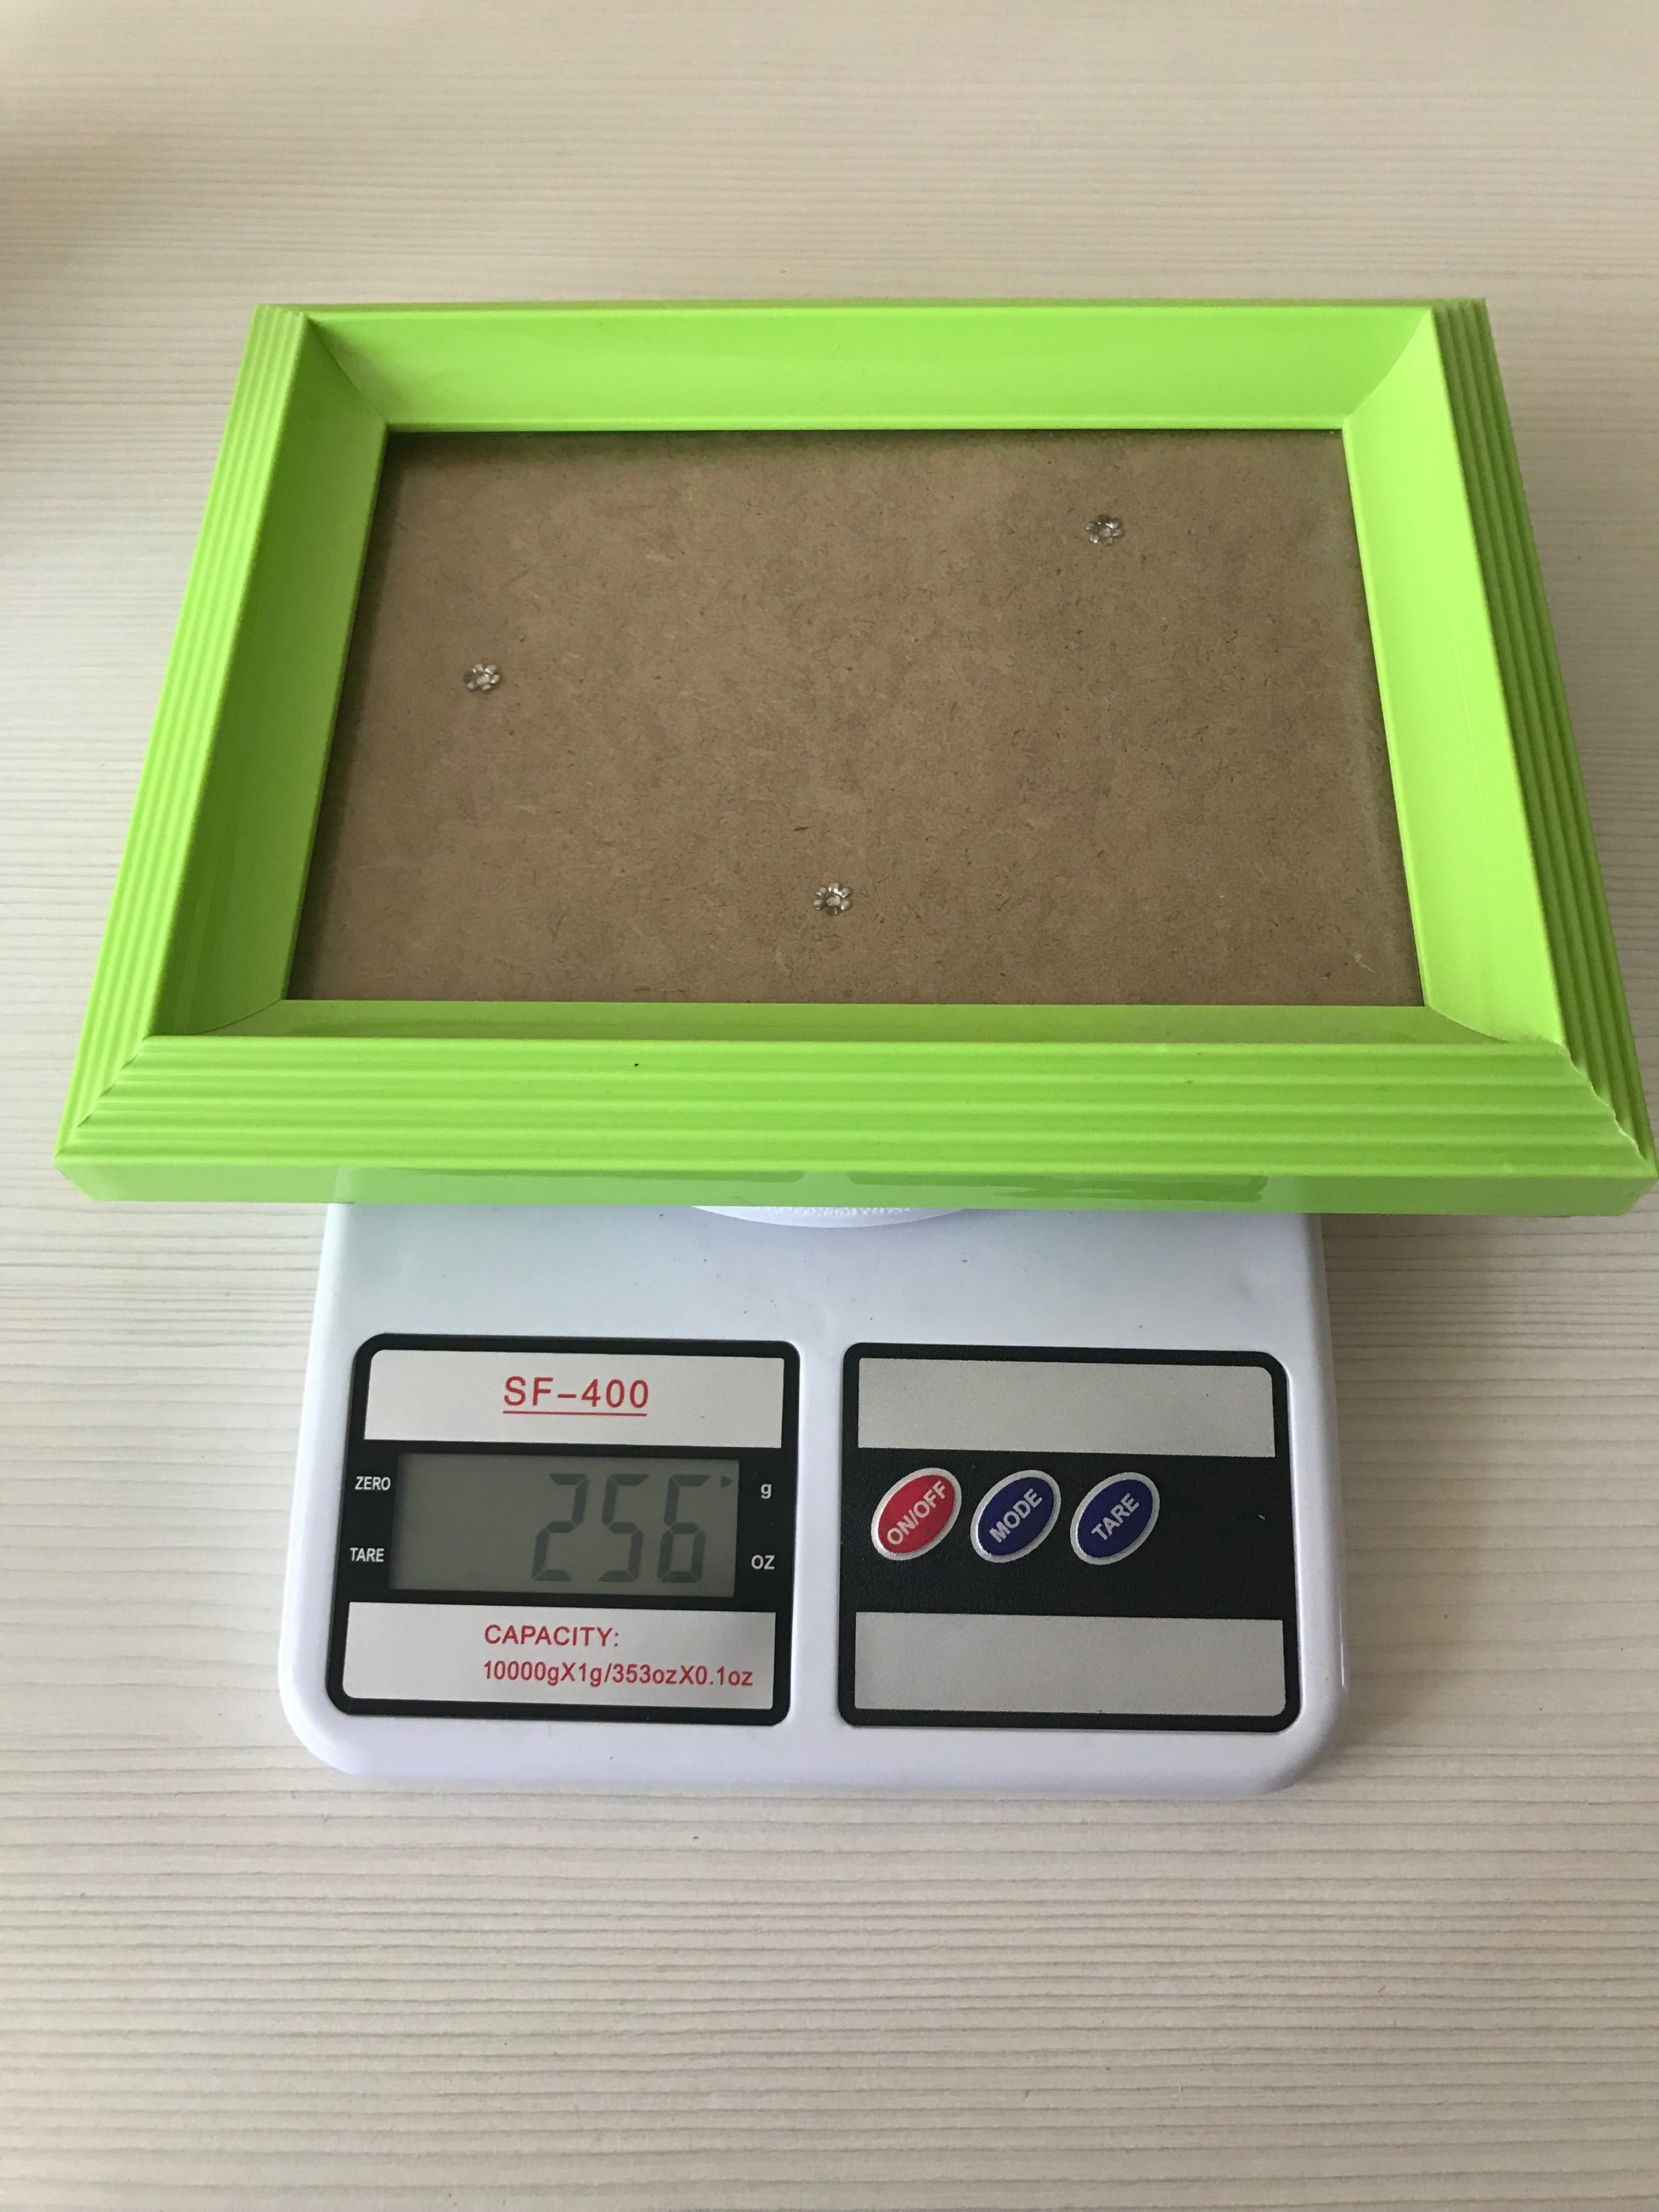 How much does a photo frame weigh?